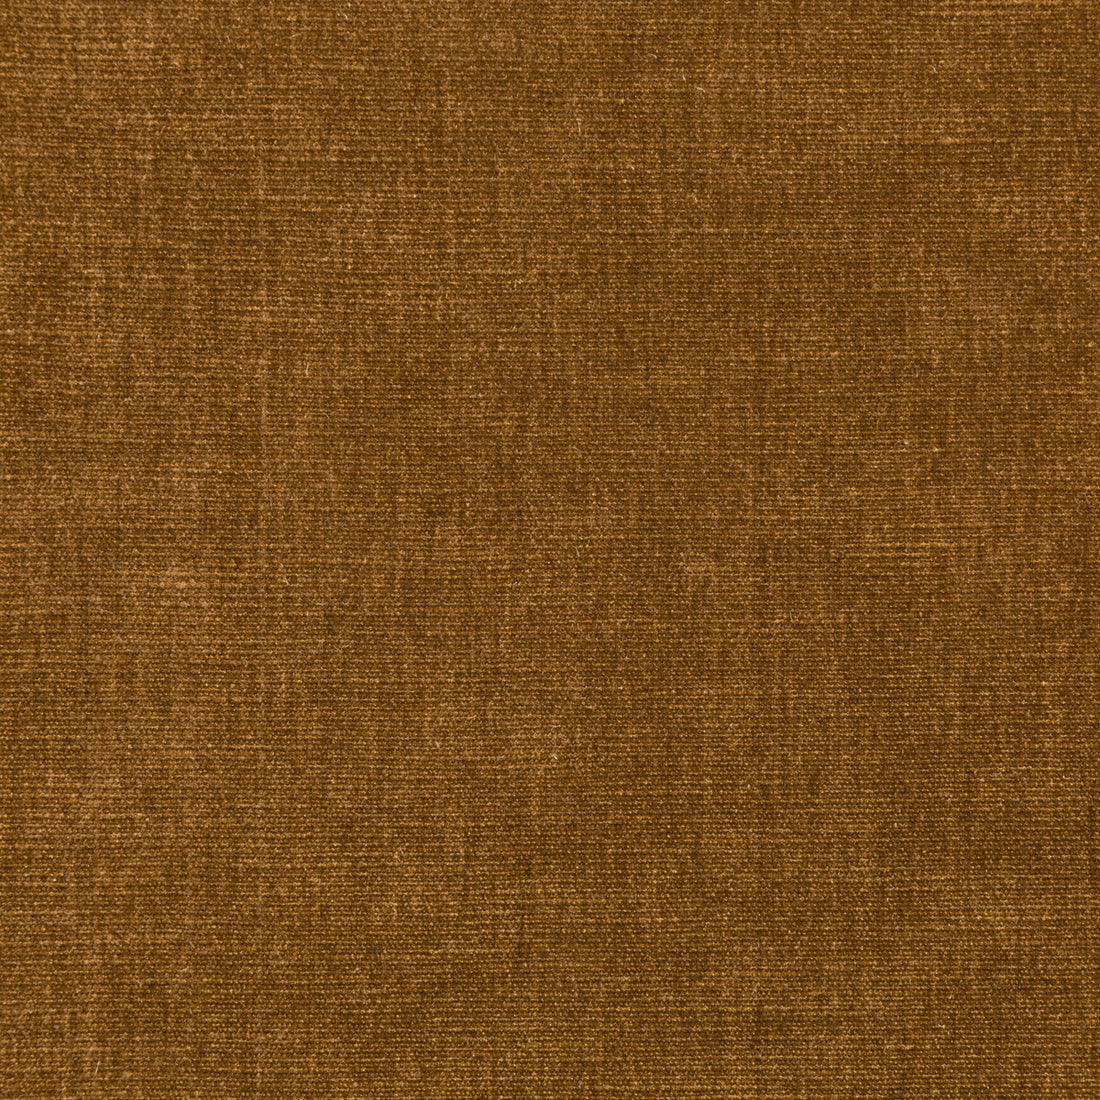 Kravet Smart fabric in 36076-4 color - pattern 36076.4.0 - by Kravet Smart in the Sumptuous Chenille II collection